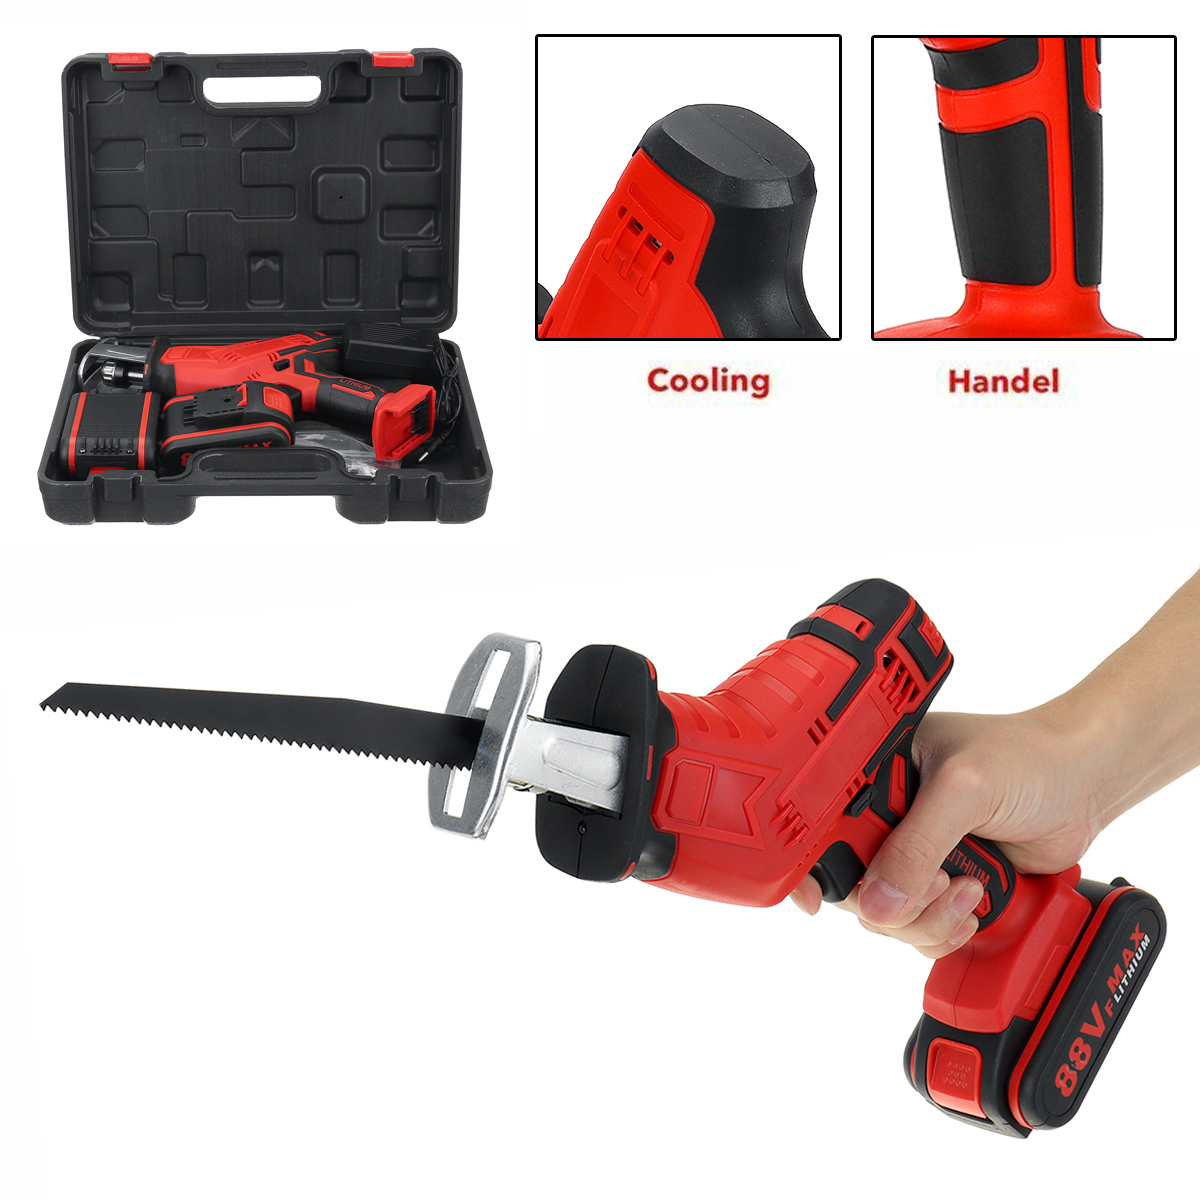 88VF-Electric-Reciprocating-Saws-Outdoor-Woodworking-Cordless-Portable-Saw-With-Blade-1721109-7